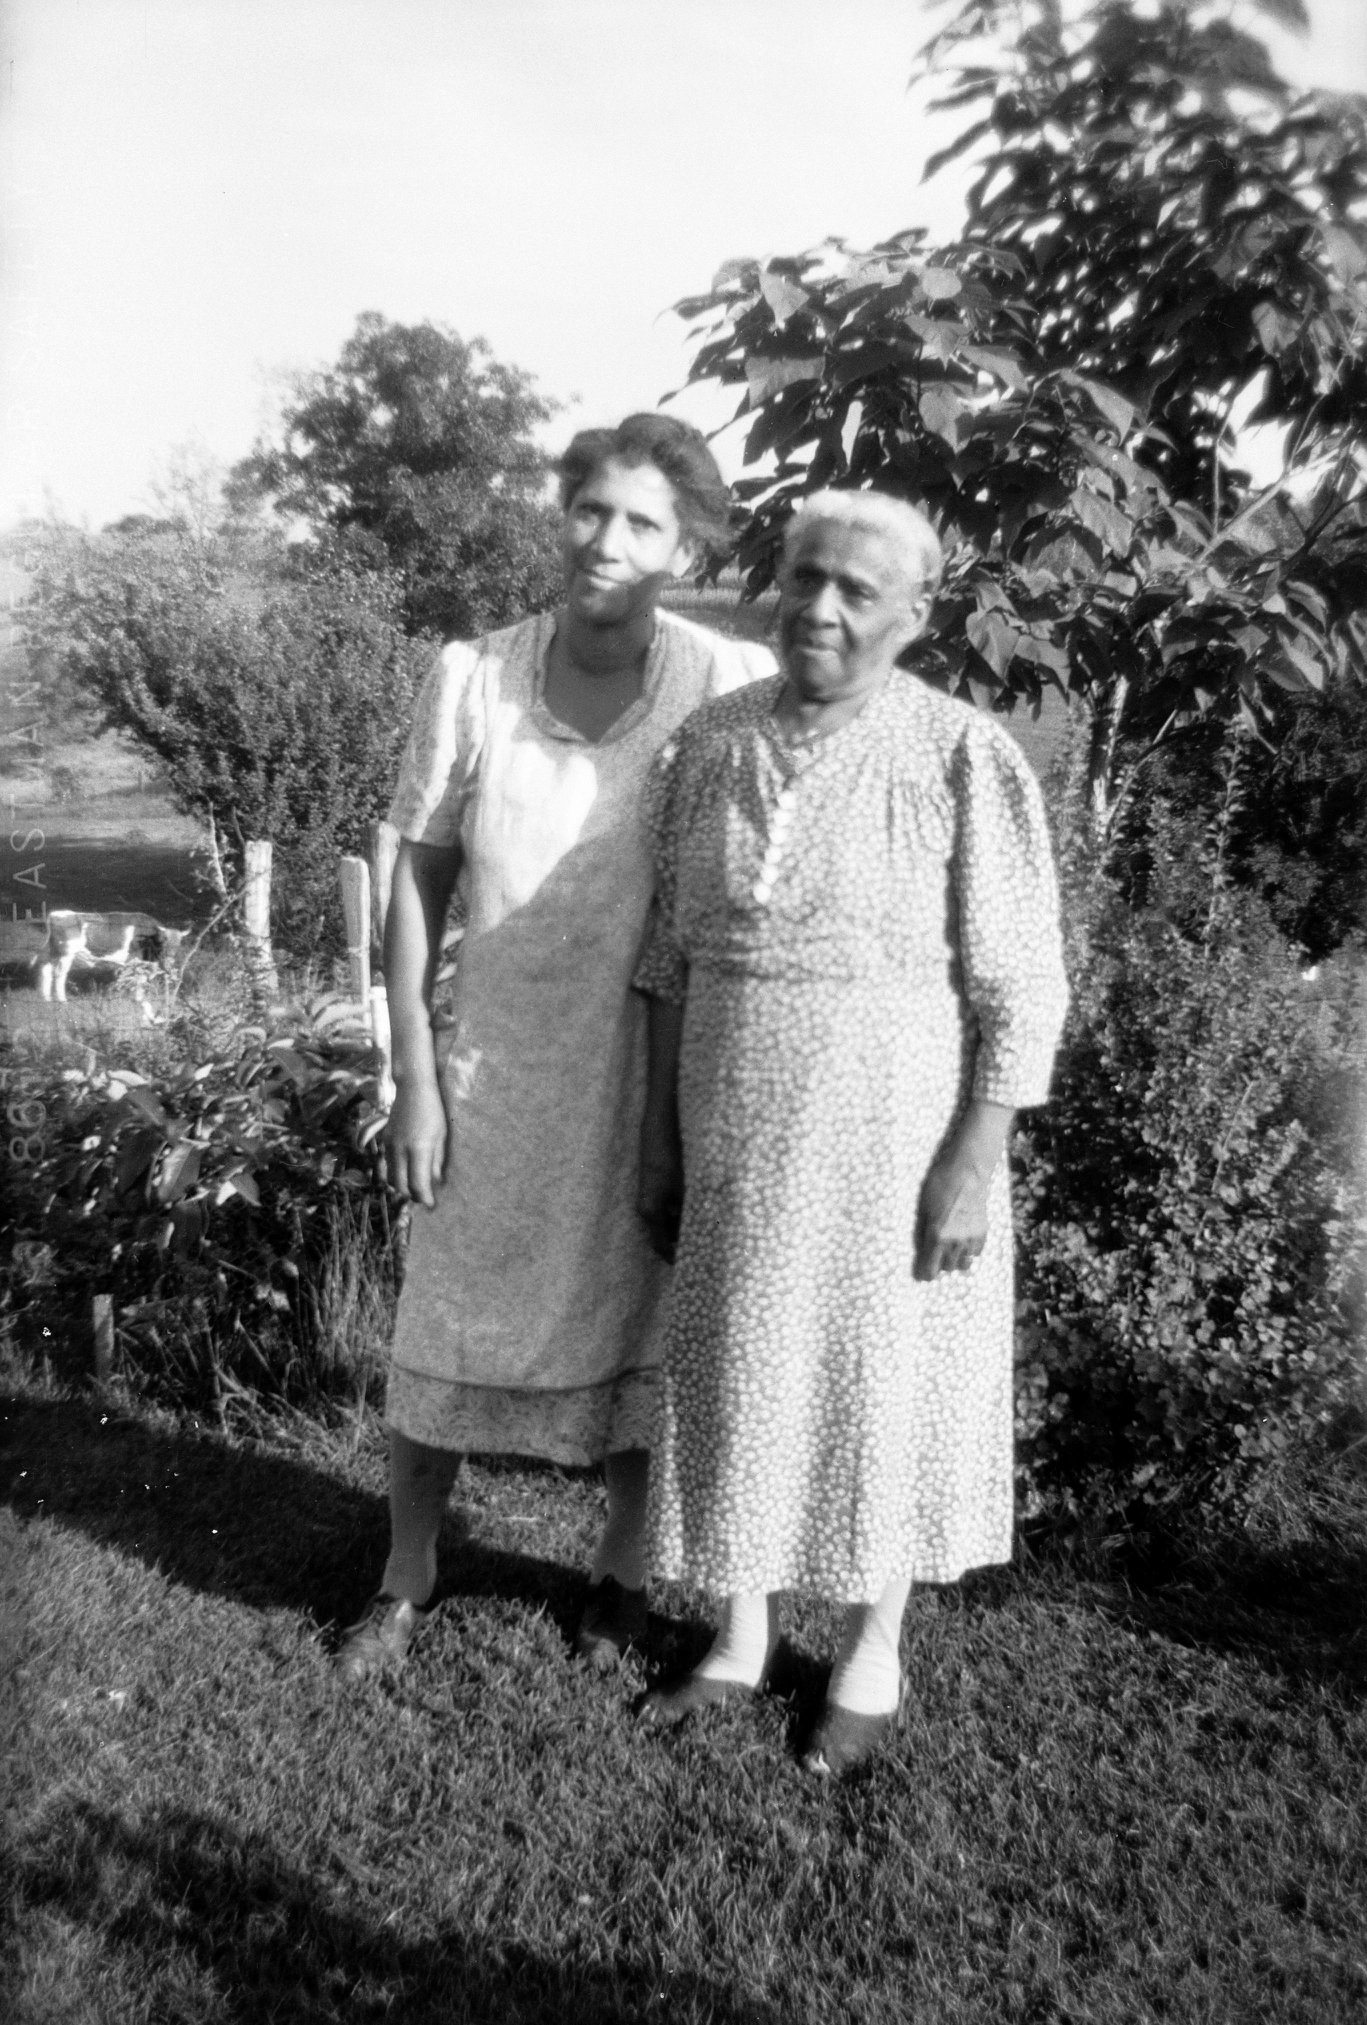 Lily Richmond (b.1862), right, and an unidentified woman. Richmond was born in Missouri and came to Grant County, Wisconsin between 1862 and 1870.